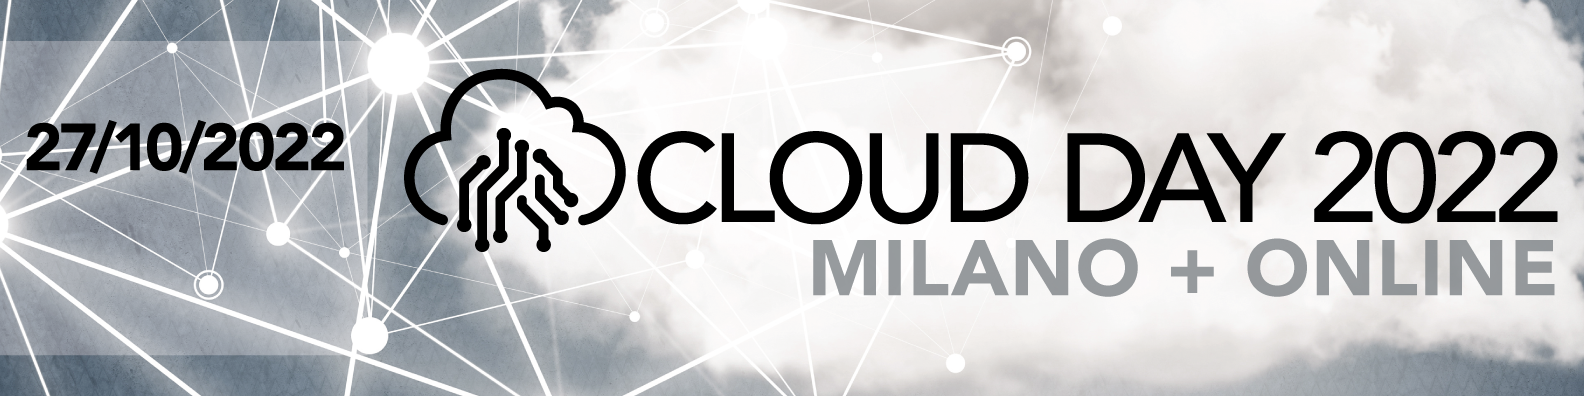 Banner evento Cloud Day 2022